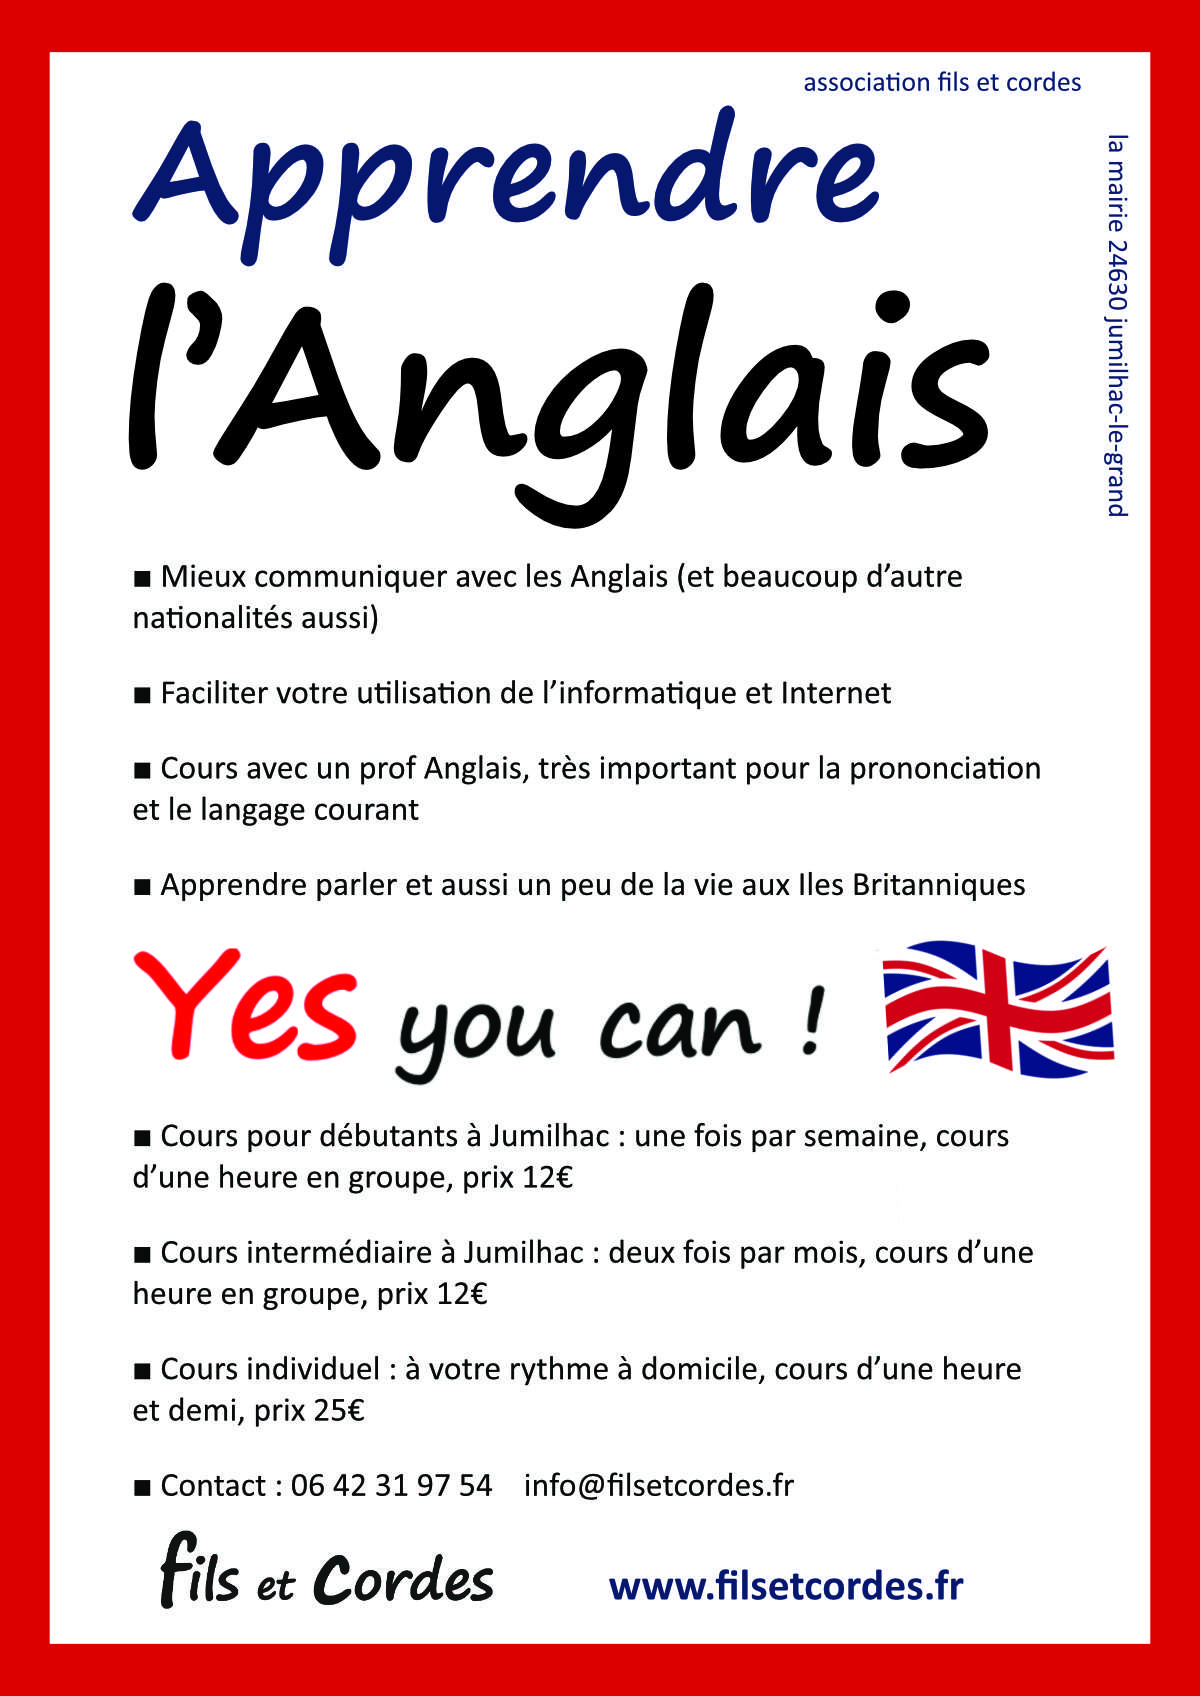 flyer yes you can 1